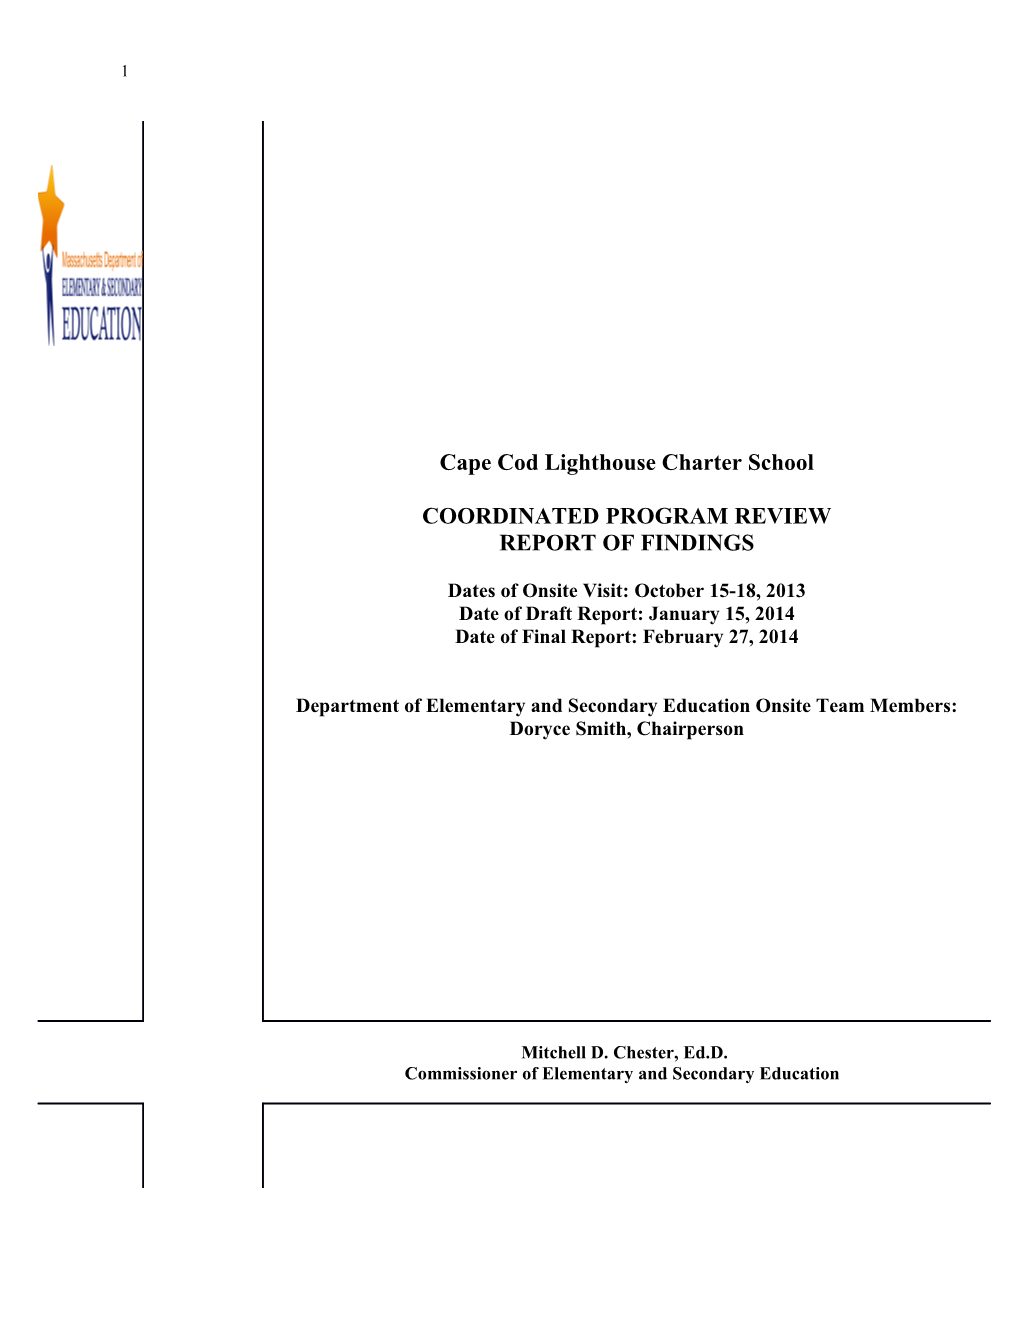 Cape Cod Lighthouse Charter School CPR Final Report 2014